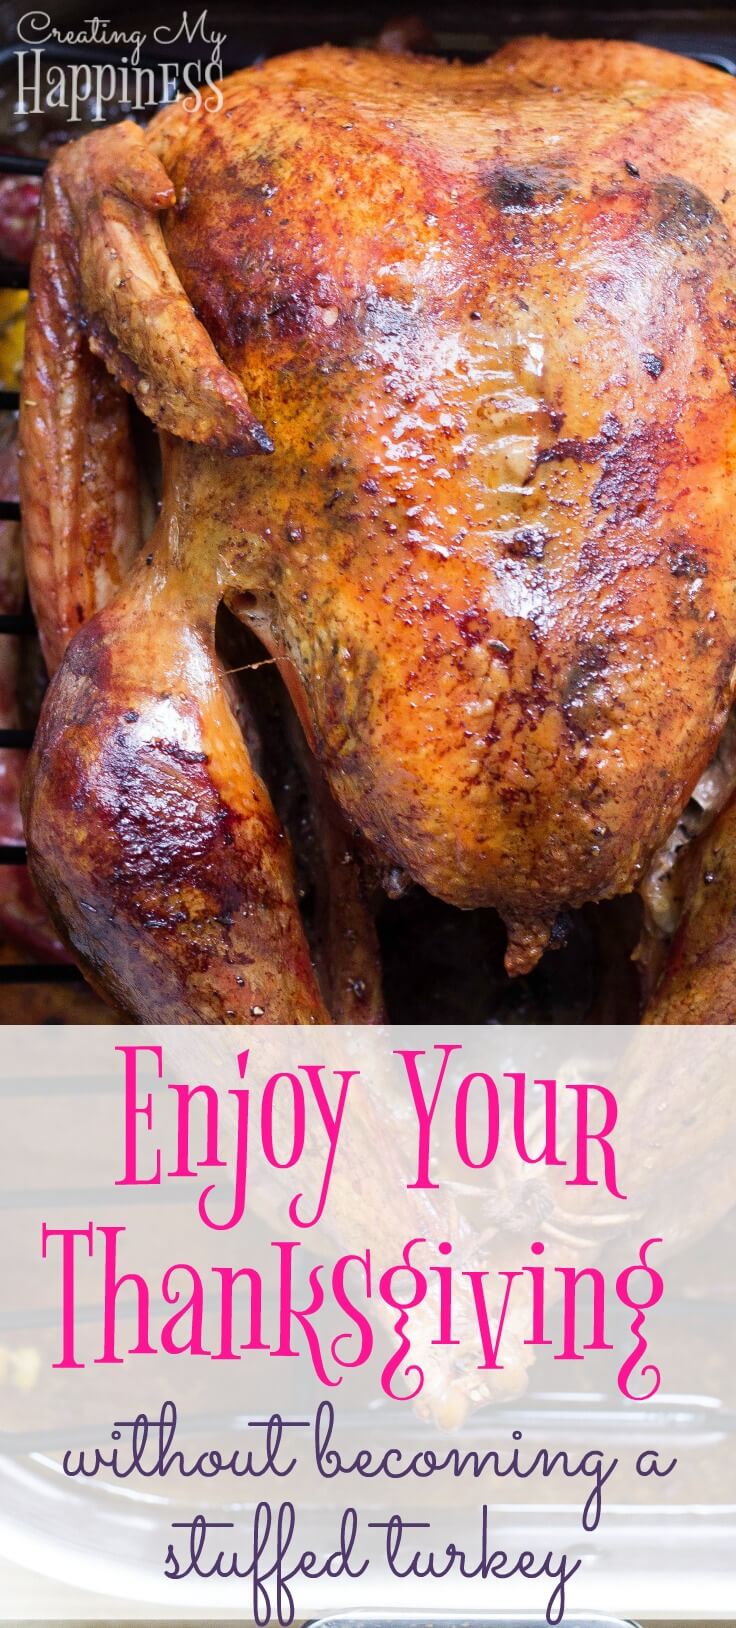 Trying to maintain weight loss over the holidays is no easy feat, and the holidays are stressful enough without worrying about every bite you take. I was so glad to find these simple, realistic tips to help avoid feeling like a stuffed turkey myself!